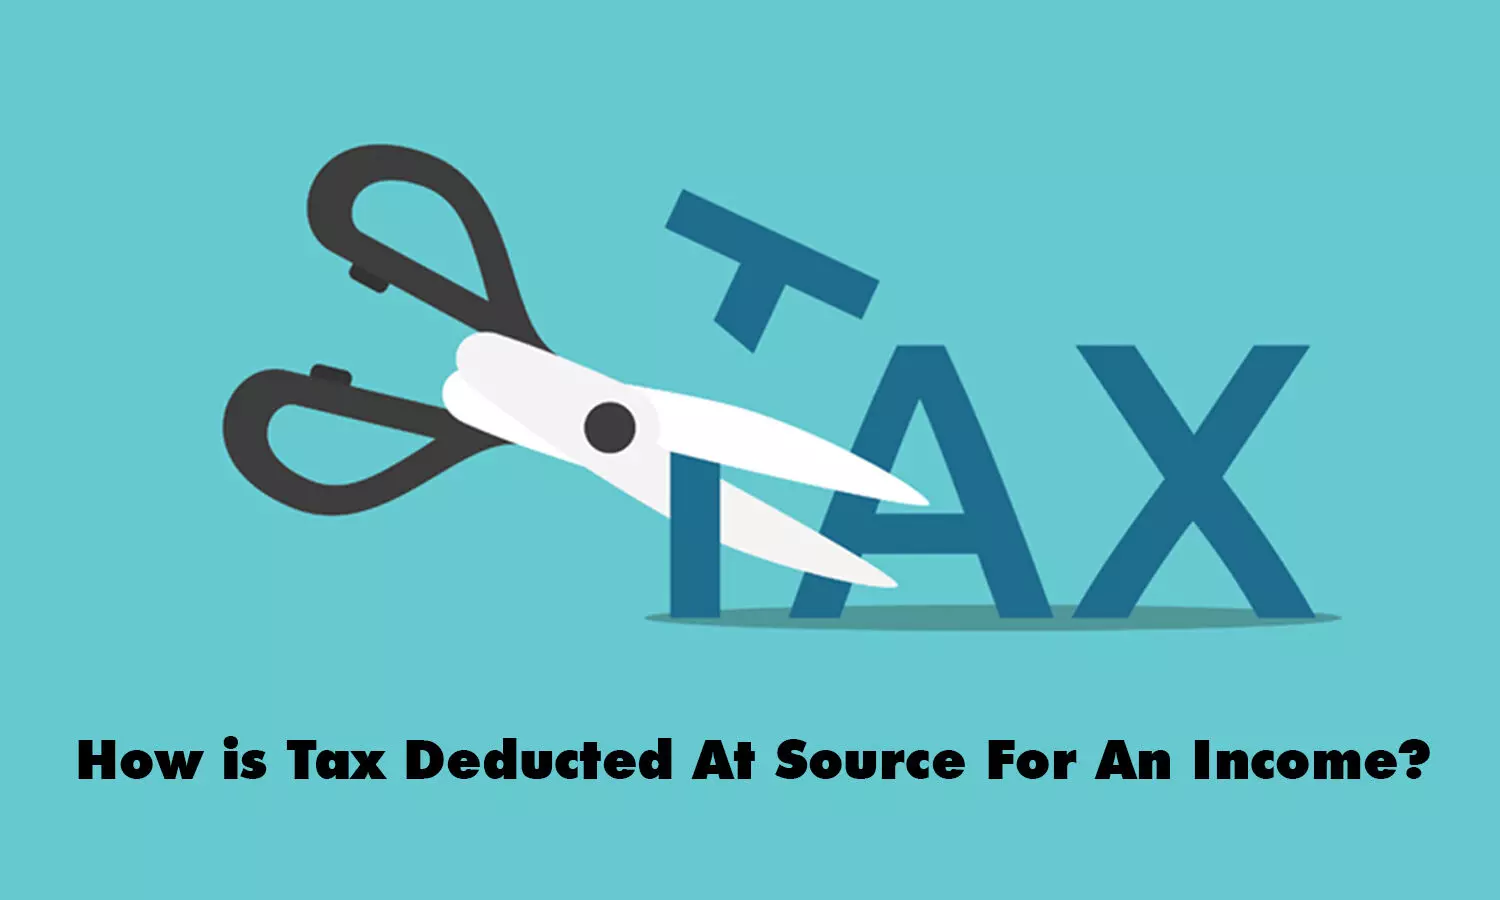 How is Tax Deducted At Source For An Income?